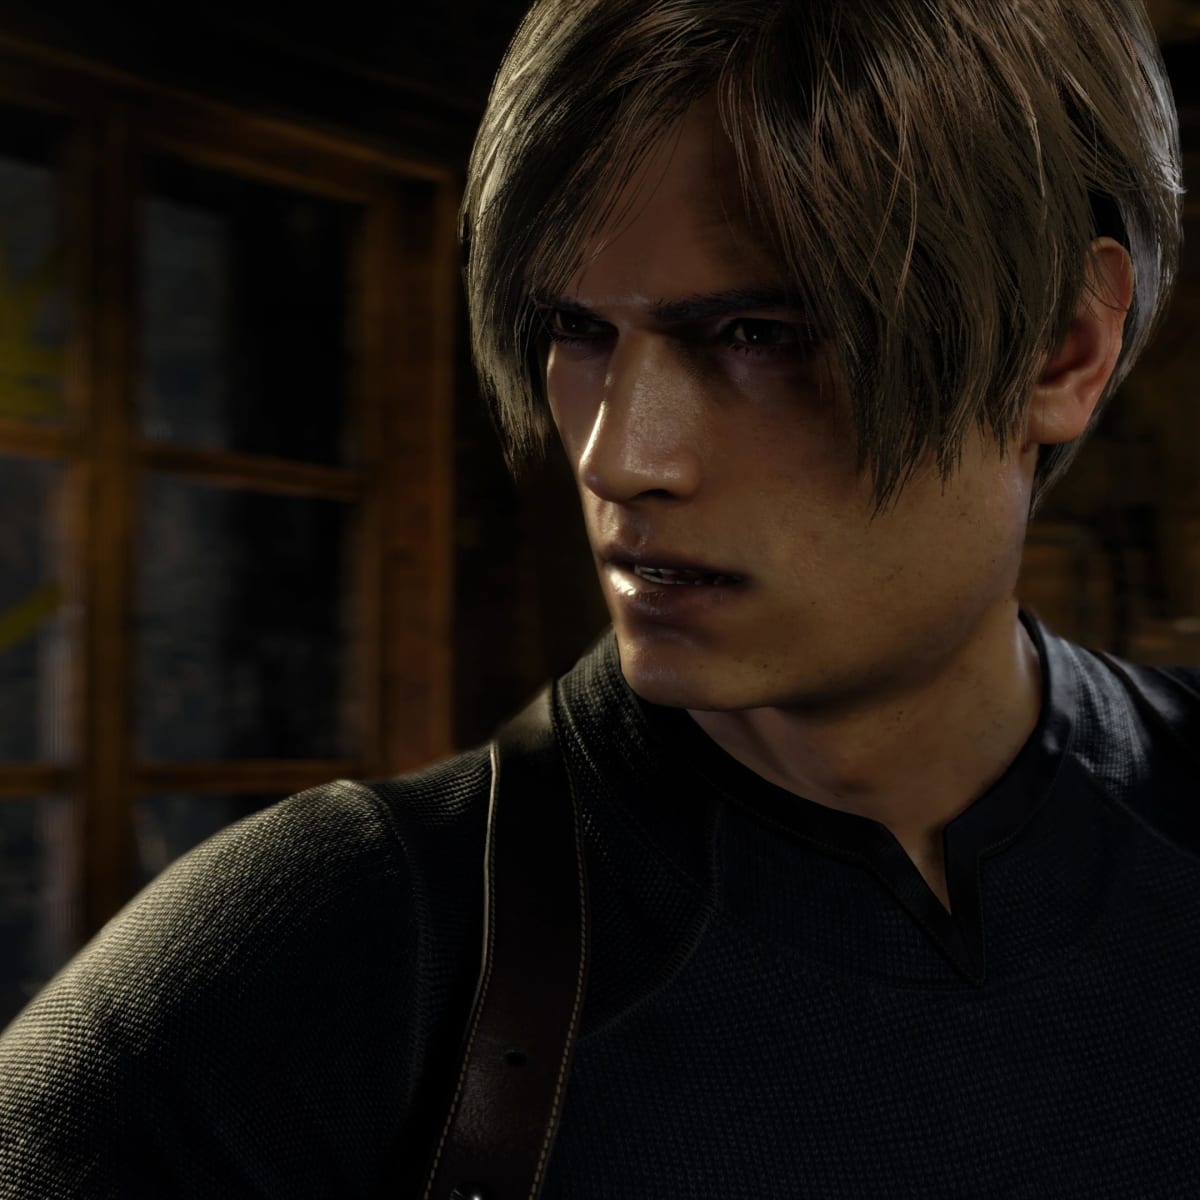 Resident Evil 4 remake beginner tips: 11 things to know before